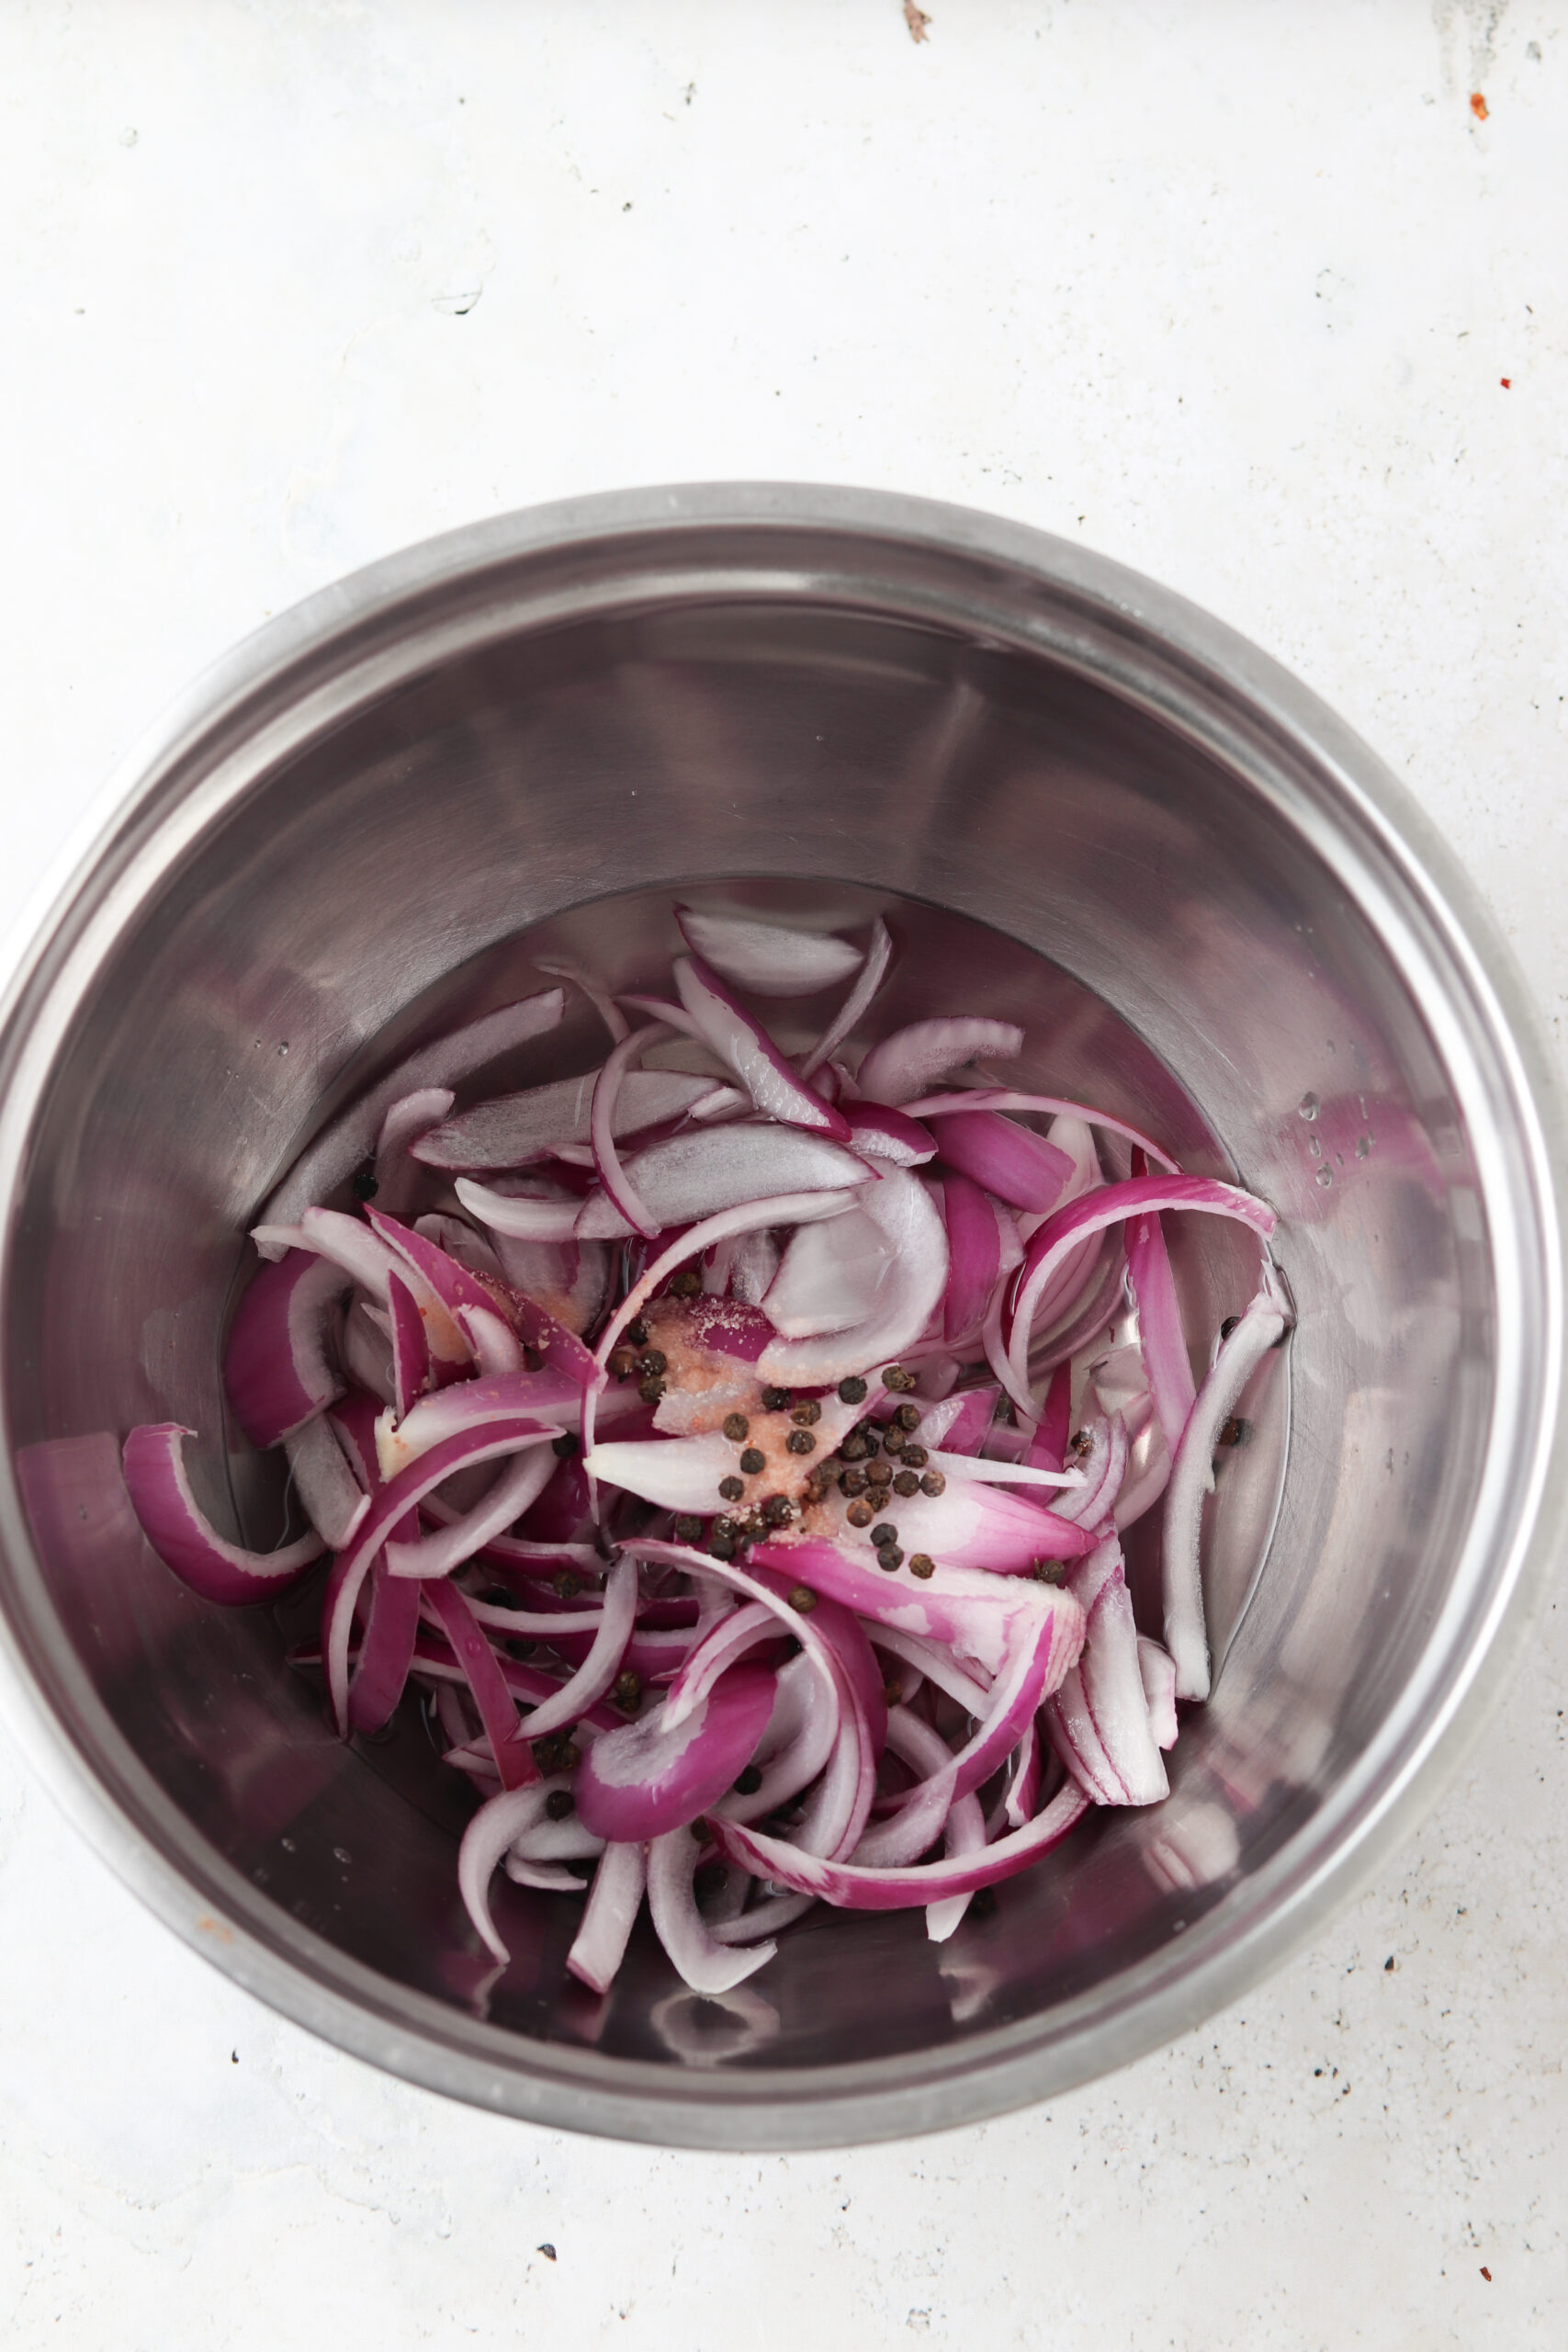 Raw onions and pickling ingredients in a silver bowl.